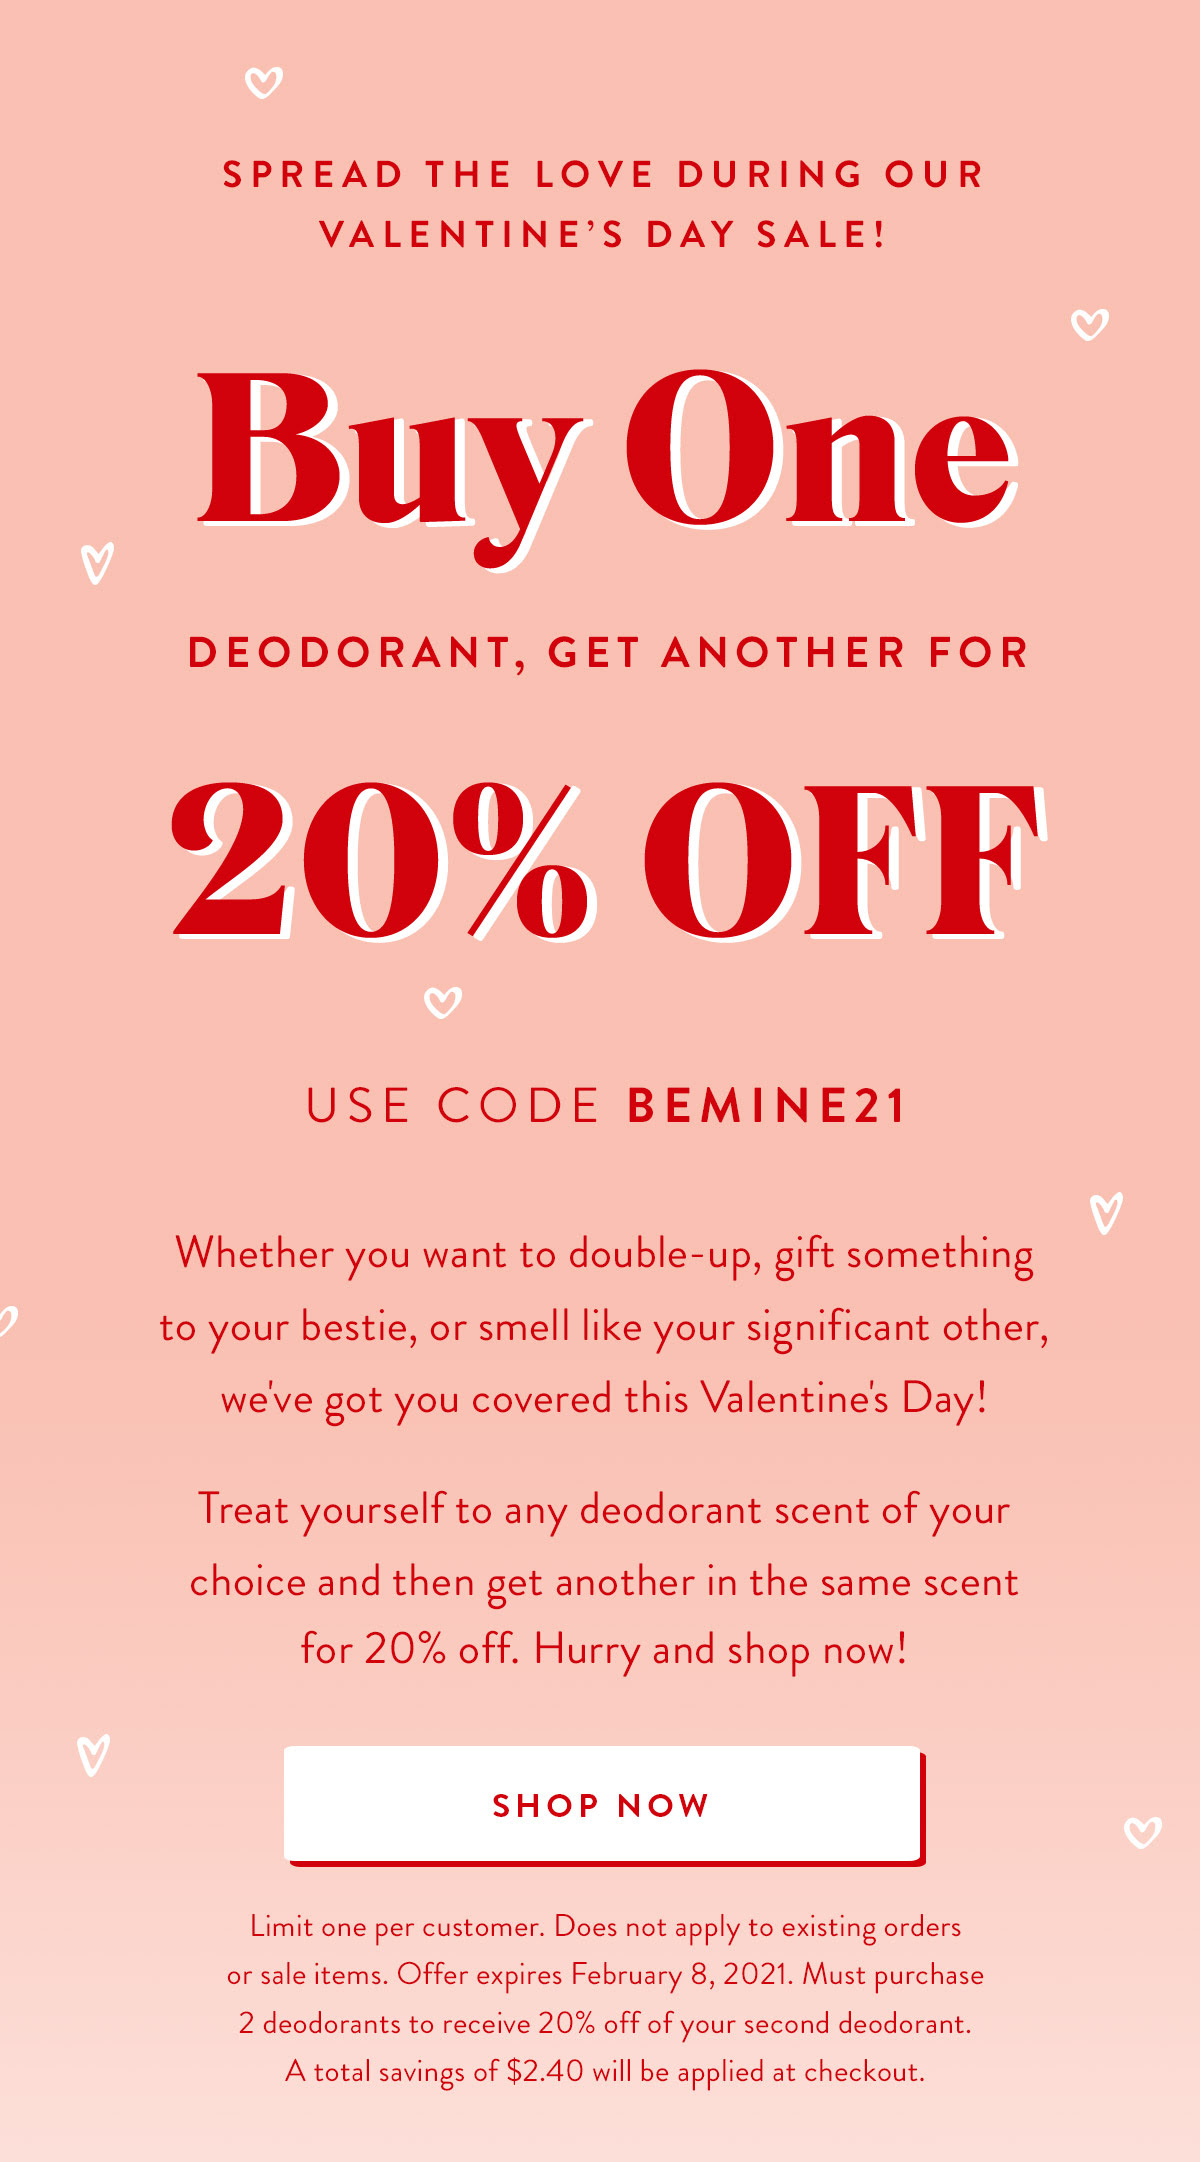 Spread the Love During Our Valentine's Day Sale! Buy One Deodorant, Get Another for 20% OFF | Use code BEMINE21 | Whether you want to double-up, gift something to your bestie, or smell like your significant other, we've got you covered this Valentine's Day! Treat yourself to any scent of your chouce and then get another in the same scent for 20% off. Hurry and shop now! | SHOP NOW | Limit one per customer. Does not apply to existing orders or sale items. Offer expires February 8, 2021 at 11:59 pm PST. Must purchase 2 deodorants to receive 20% off of your second deodorant. A total savings of $2.40 will be applied at checkout.